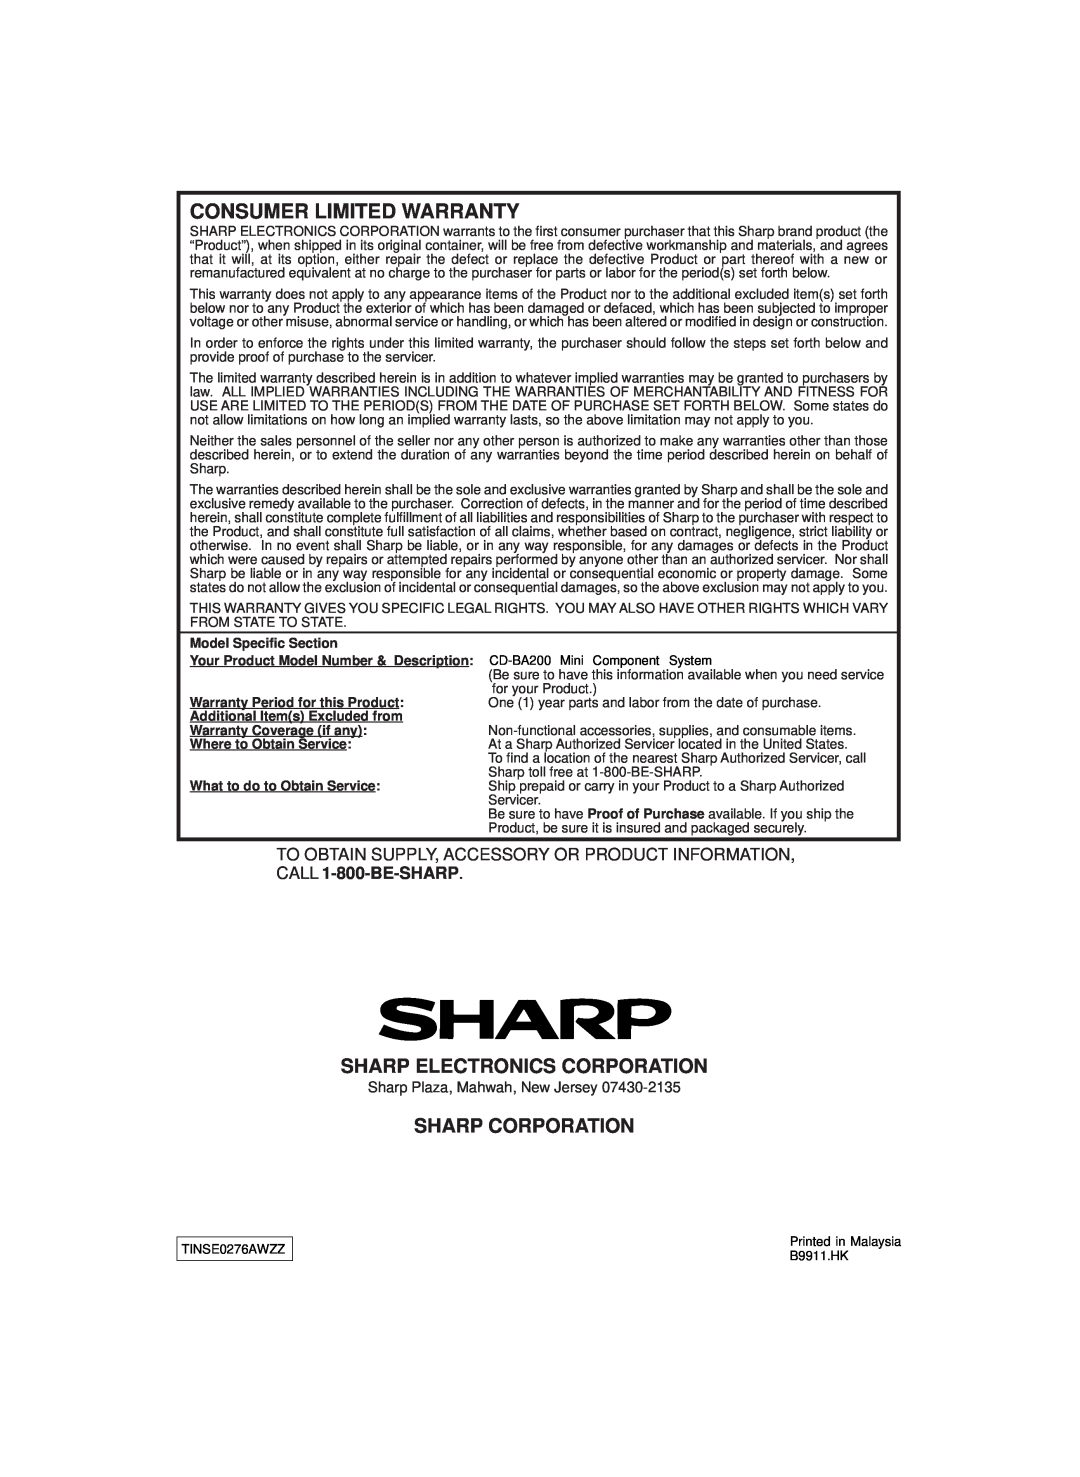 Sharp CD-BA200 Sharp Plaza, Mahwah, New Jersey, Model Specific Section, Your Product Model Number & Description 